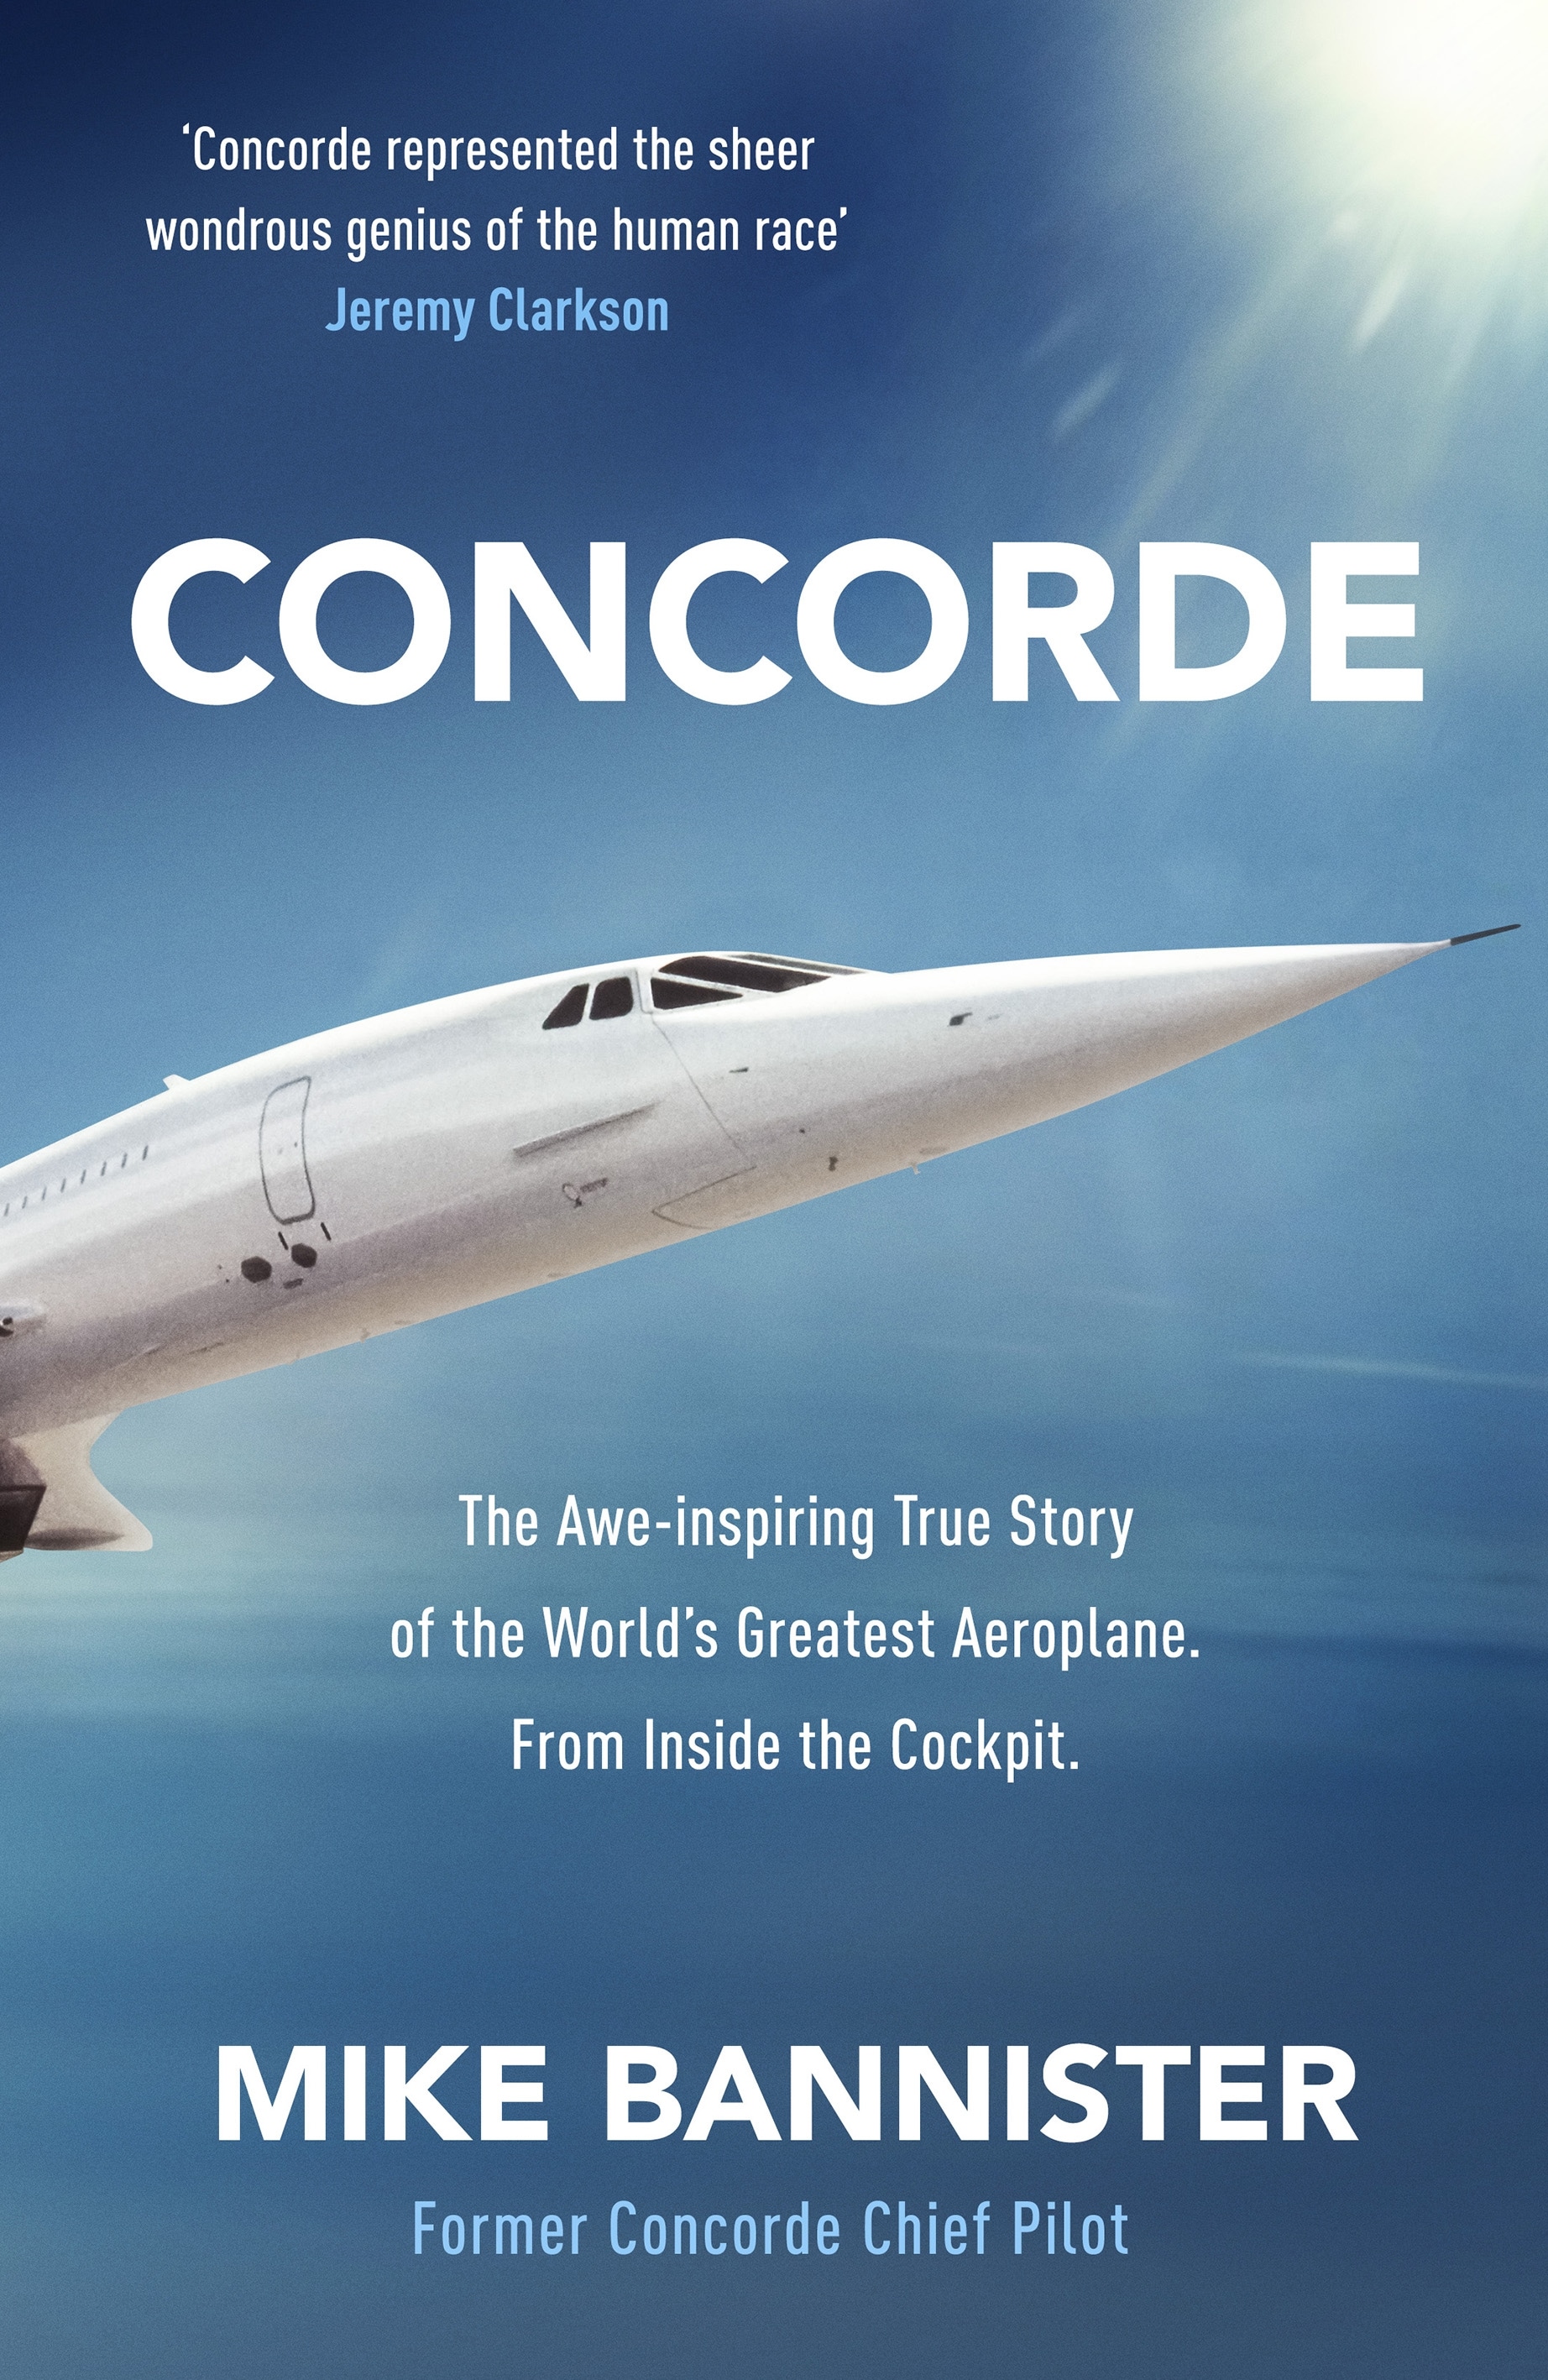 Book “Concorde” by Mike Bannister — September 29, 2022